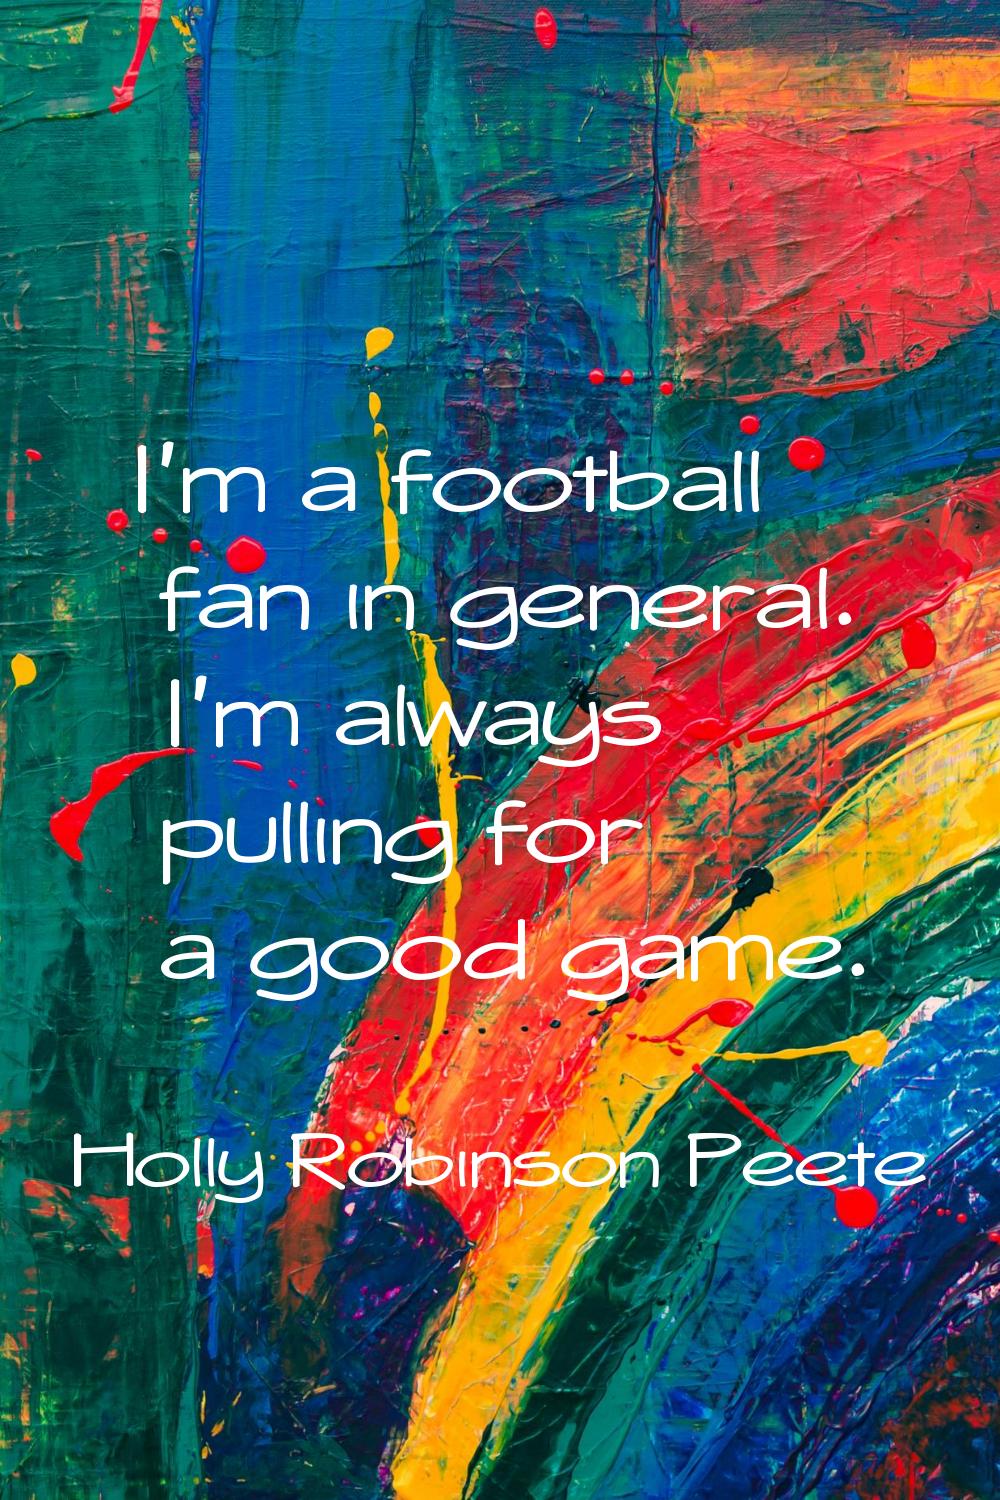 I'm a football fan in general. I'm always pulling for a good game.